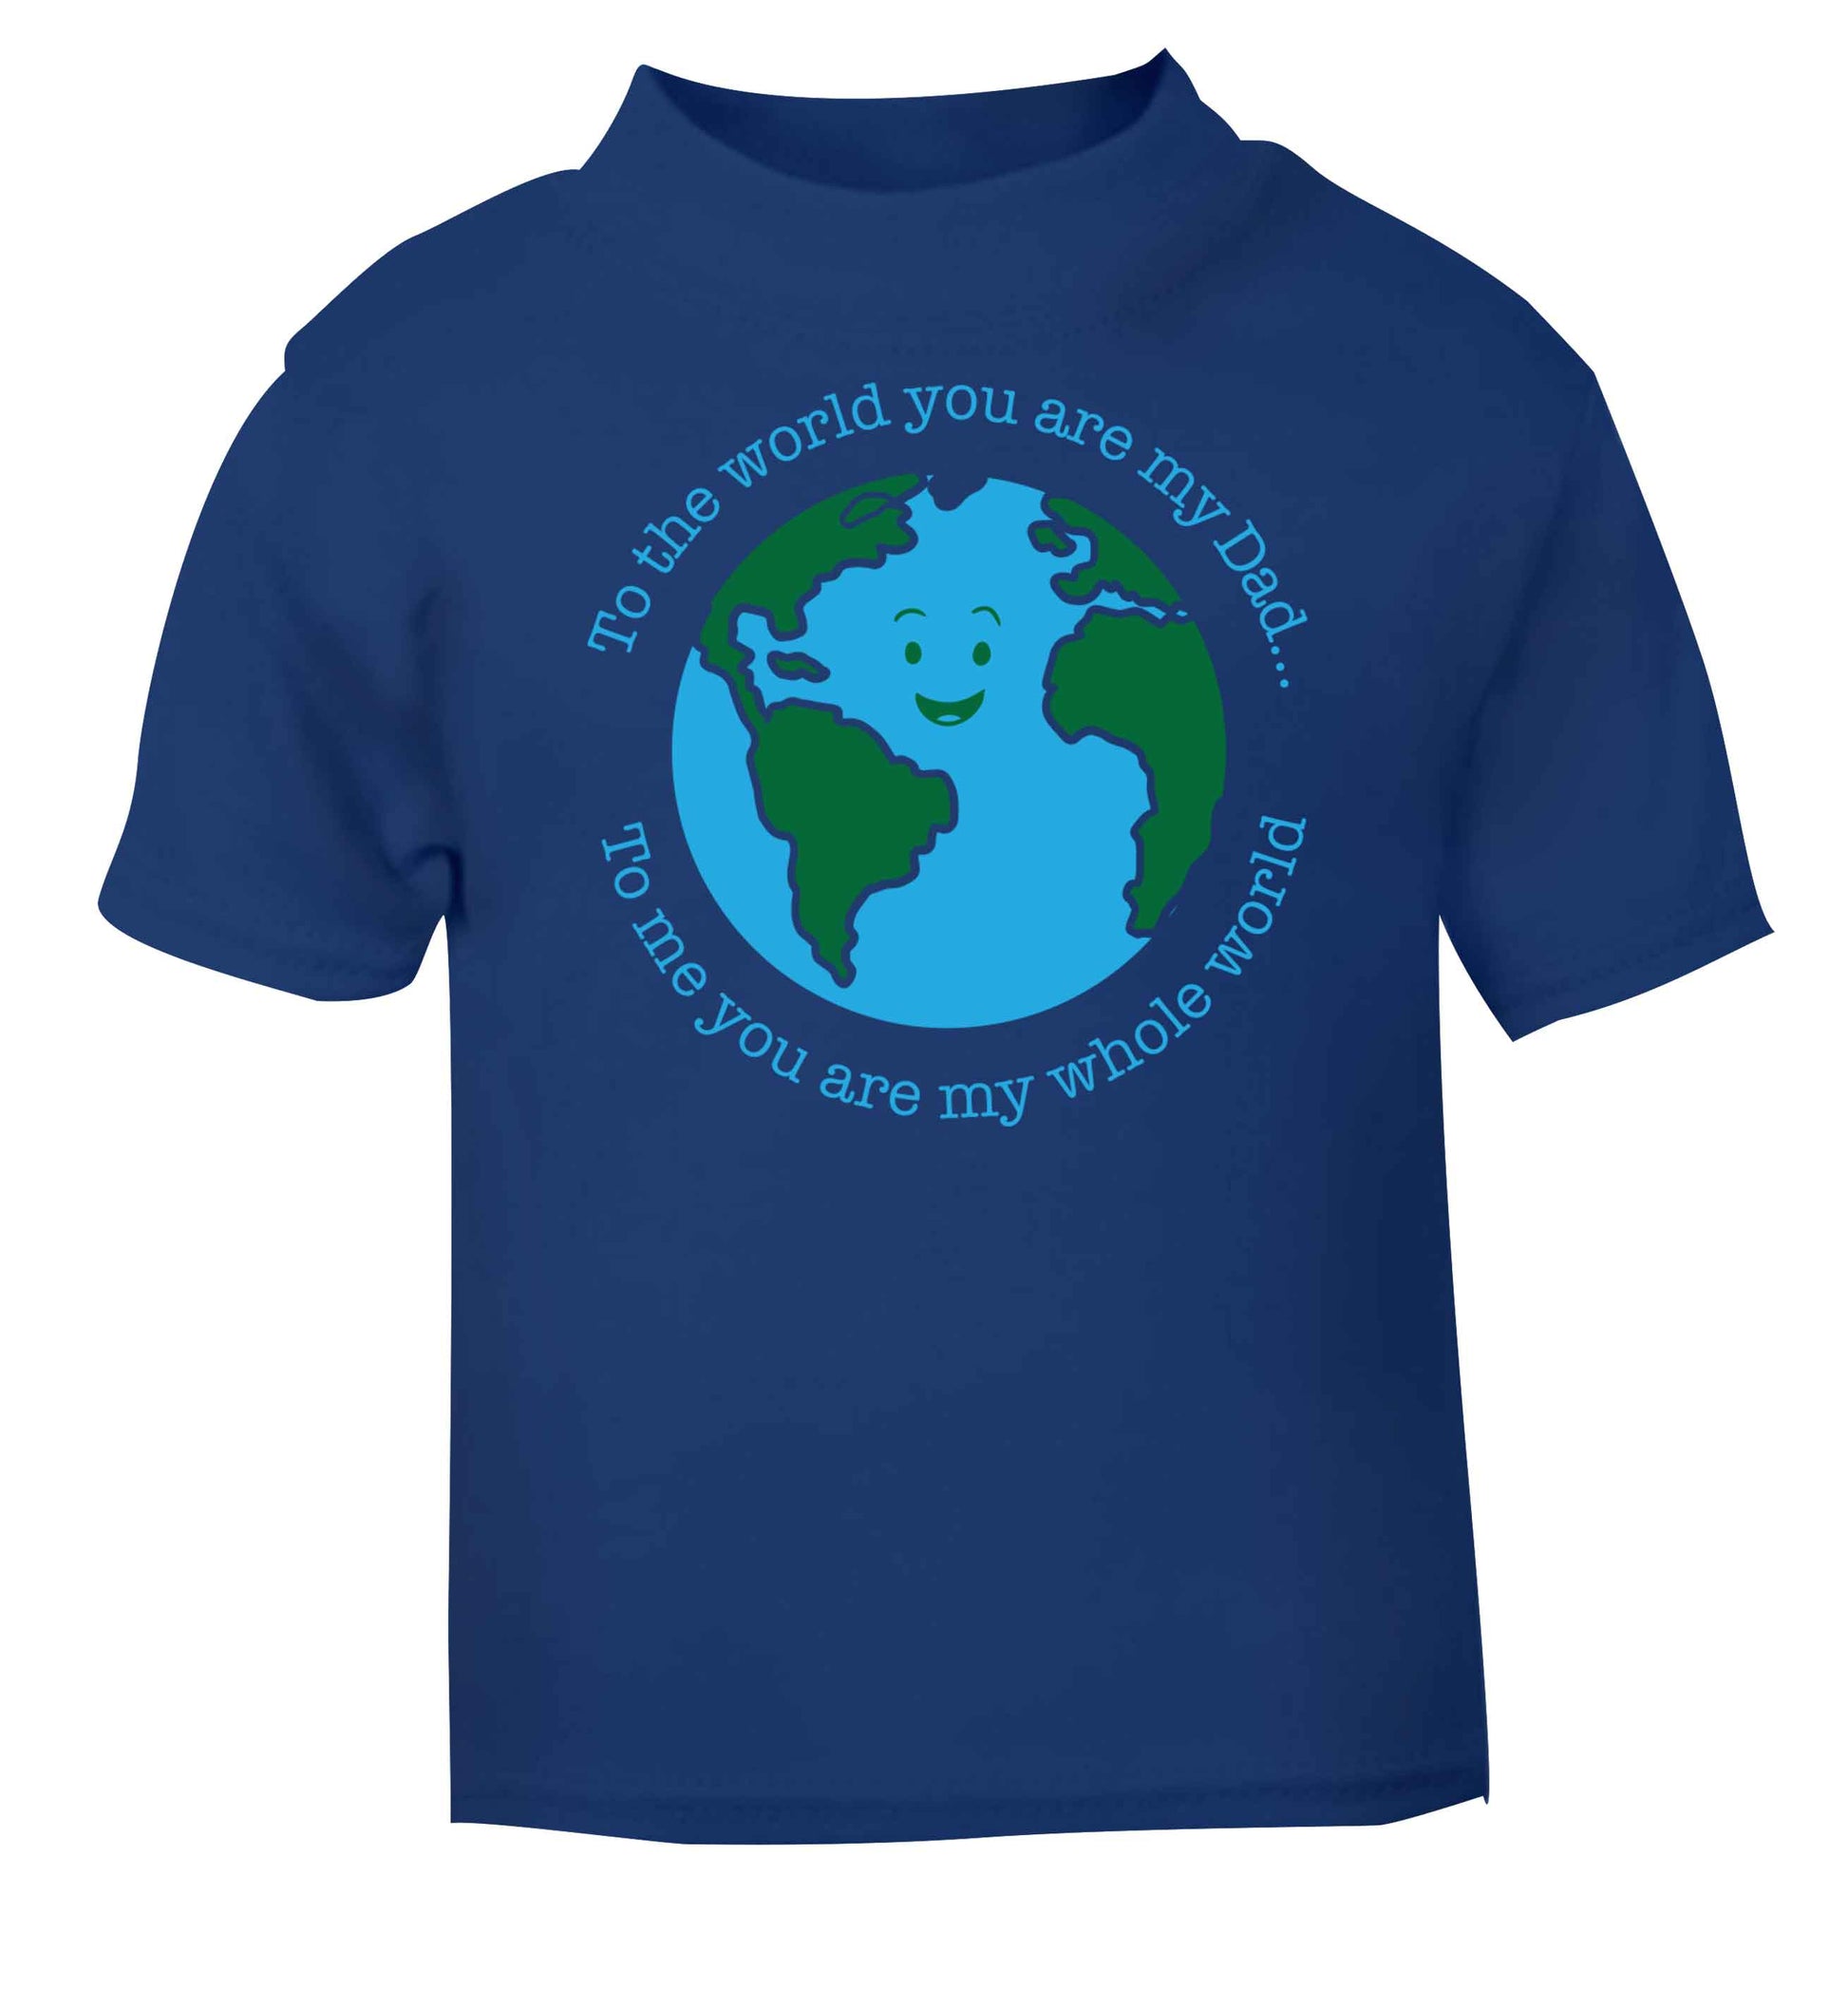 To the world you are my dad, to me you are my whole world blue baby toddler Tshirt 2 Years